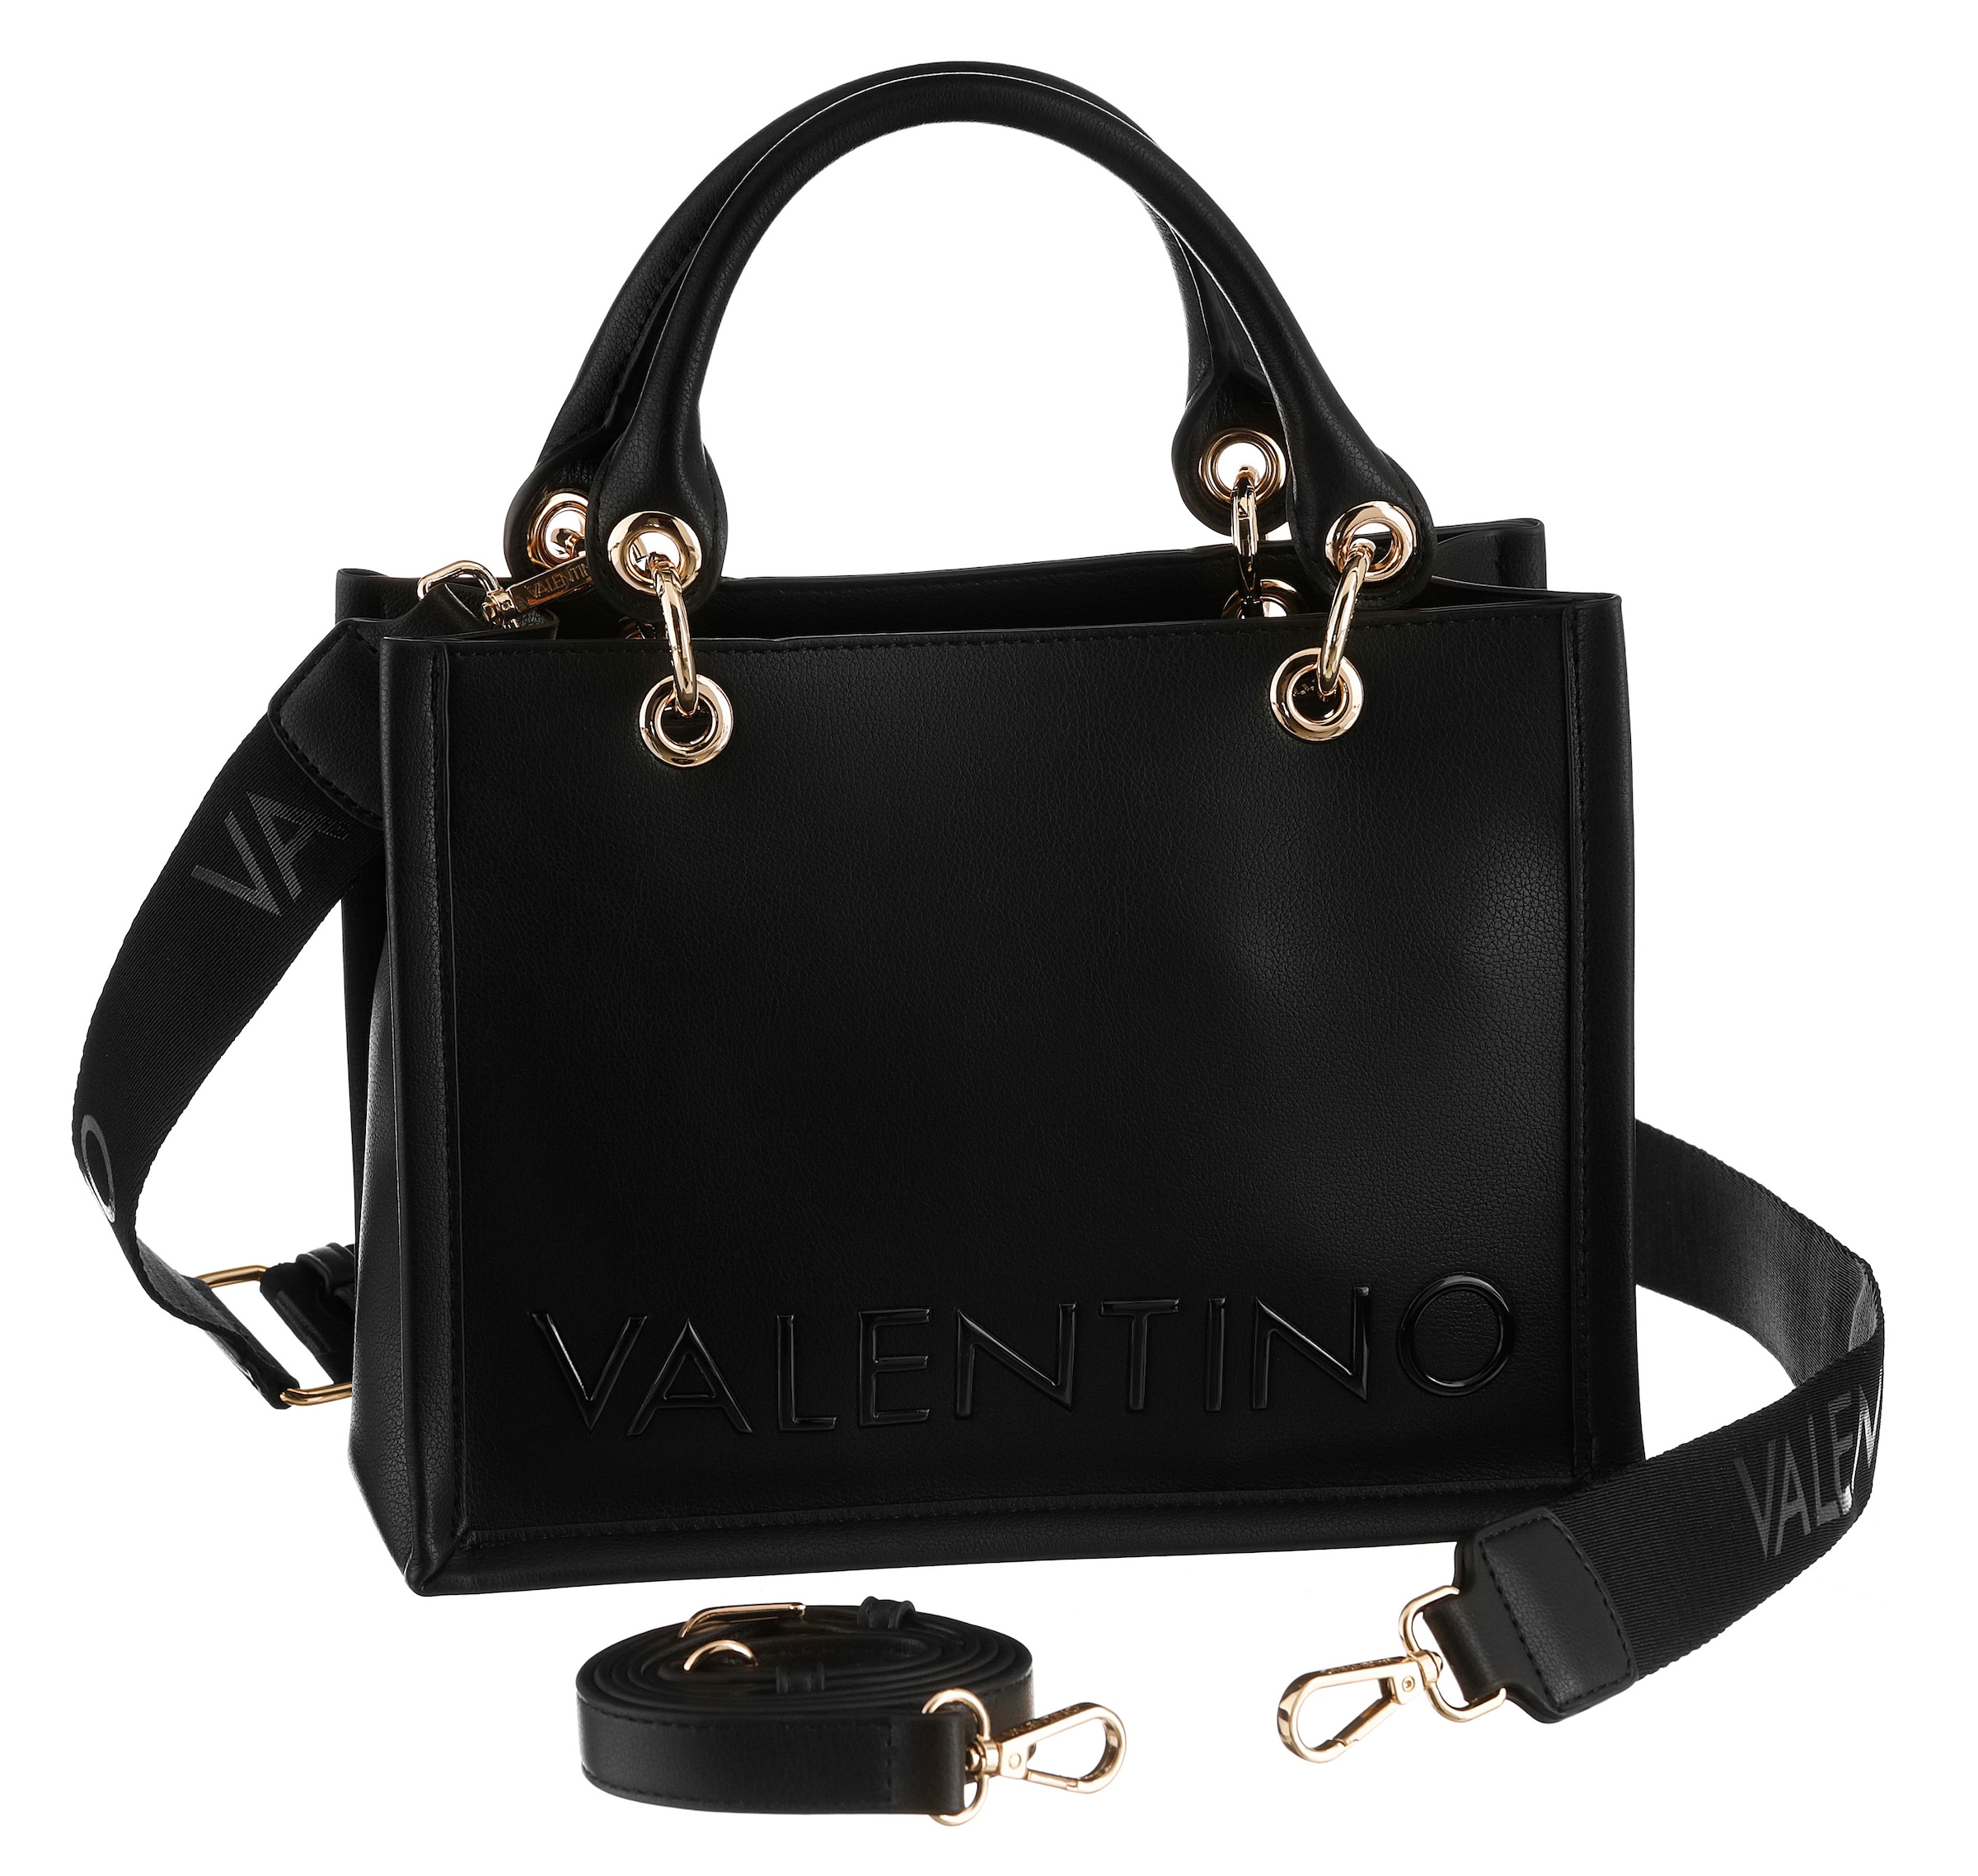 VALENTINO BAGS Shopper "PIGALLE"